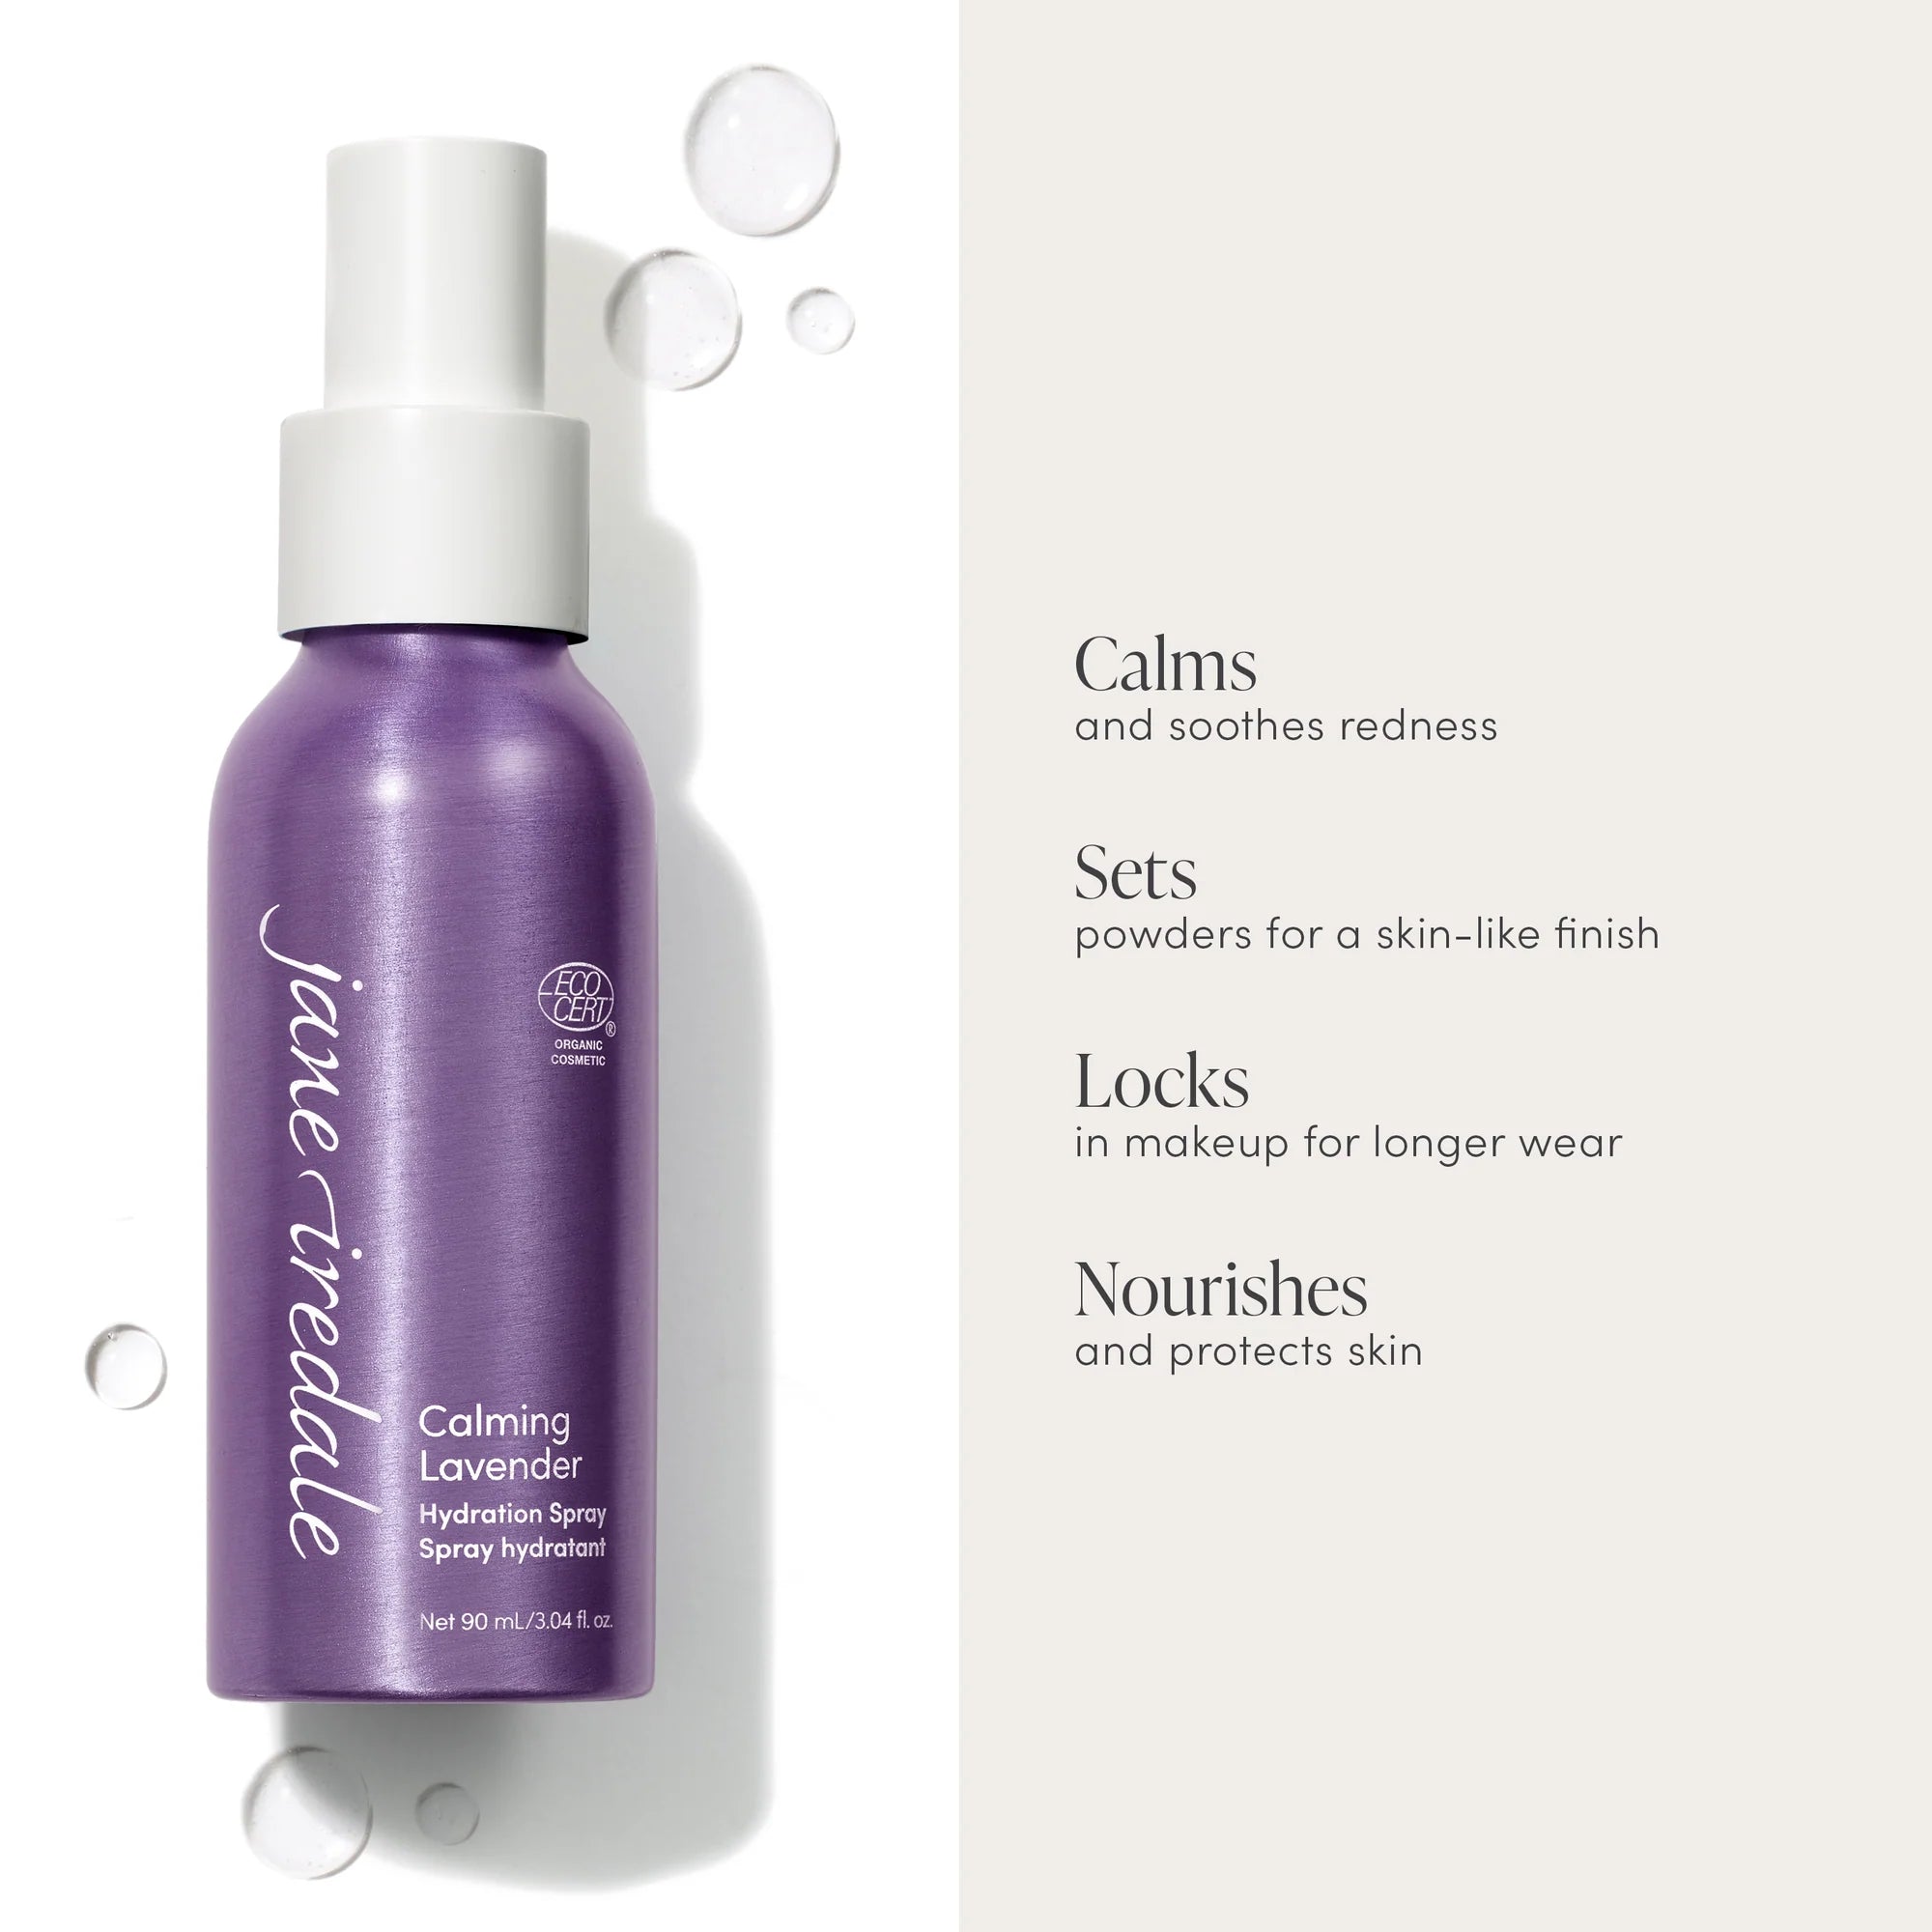 Jane Iredale | Calming Lavender Hydration Spray Product